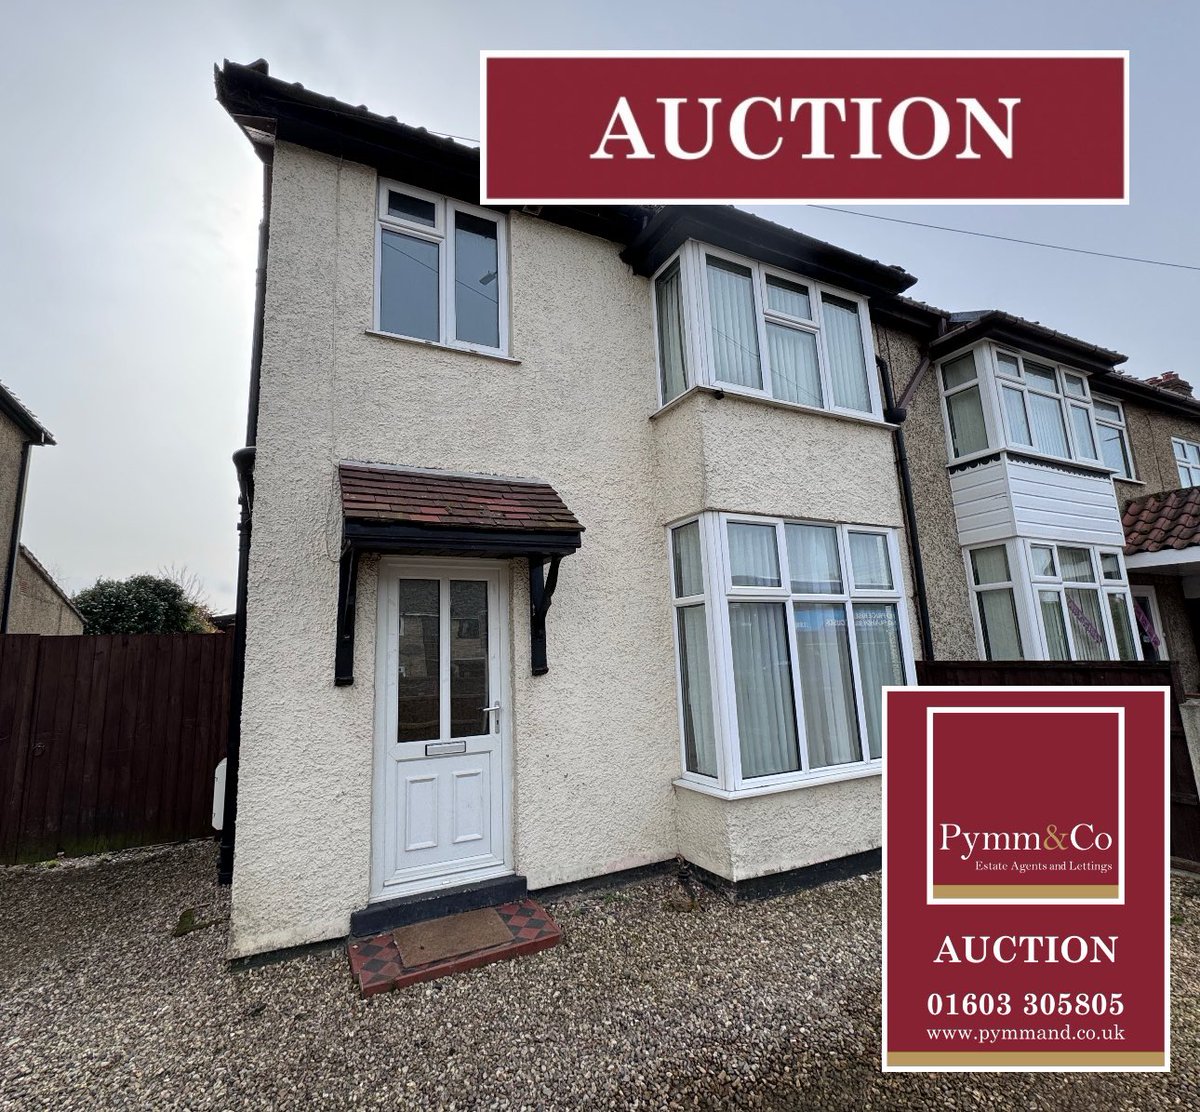 One week to auction 02/05/24 📍Golden Triangle, NR2 pymmandcoauctions.co.uk/lot/details/11… Two weeks until auction 09/05/24 📍Norwich, NR1 pymmandcoauctions.co.uk/lot/details/11… #propertyauction #flip #investment